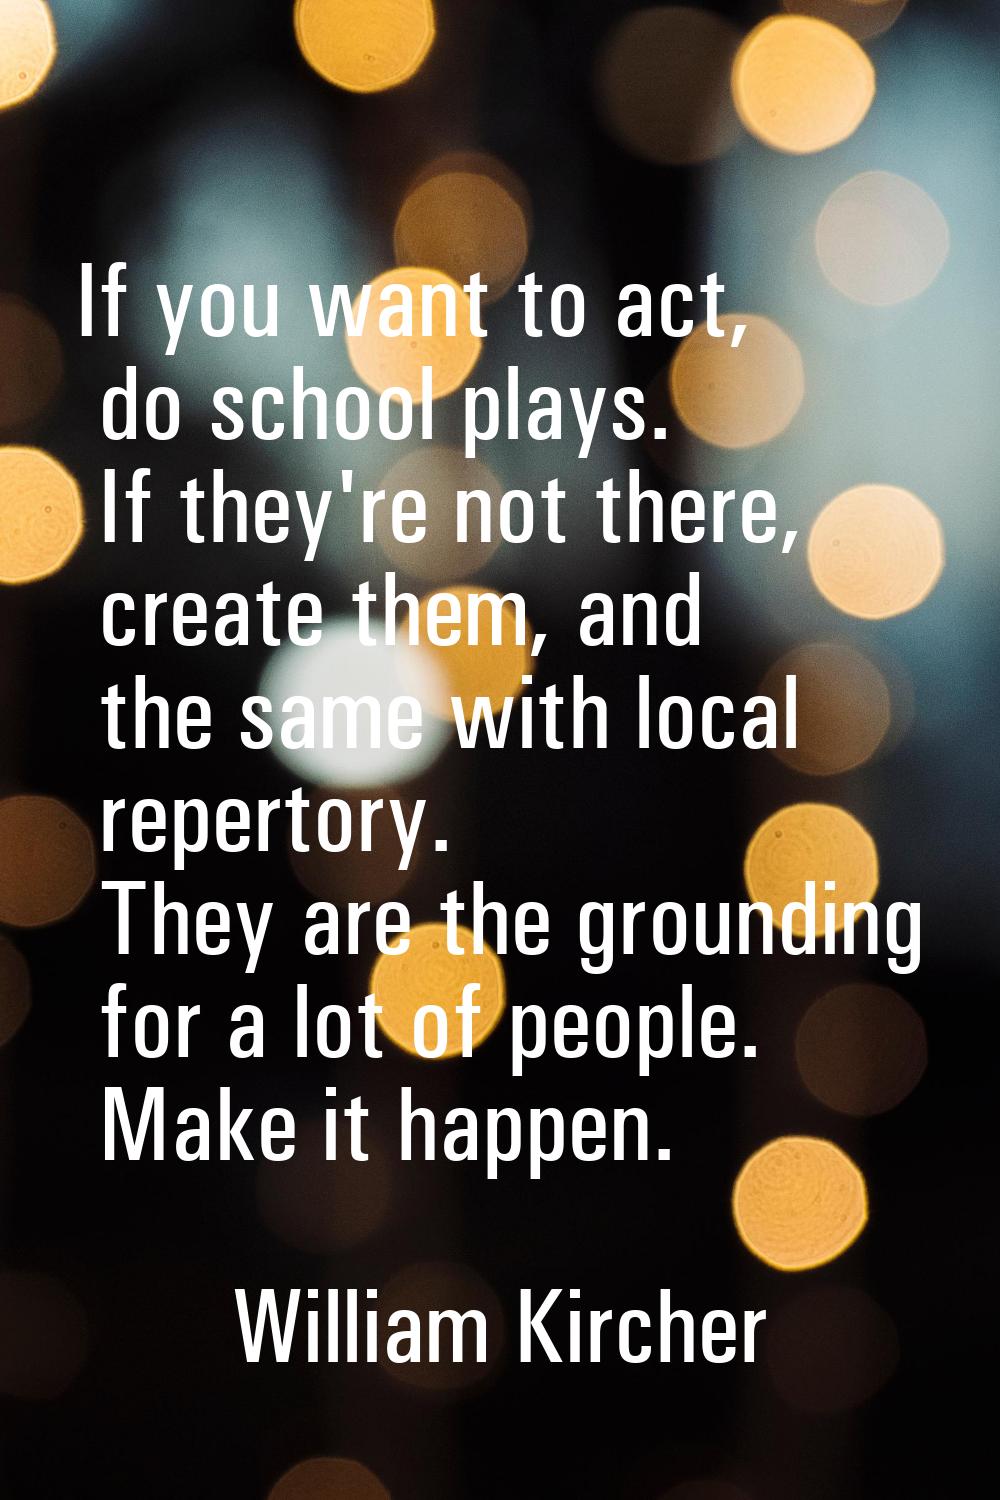 If you want to act, do school plays. If they're not there, create them, and the same with local rep